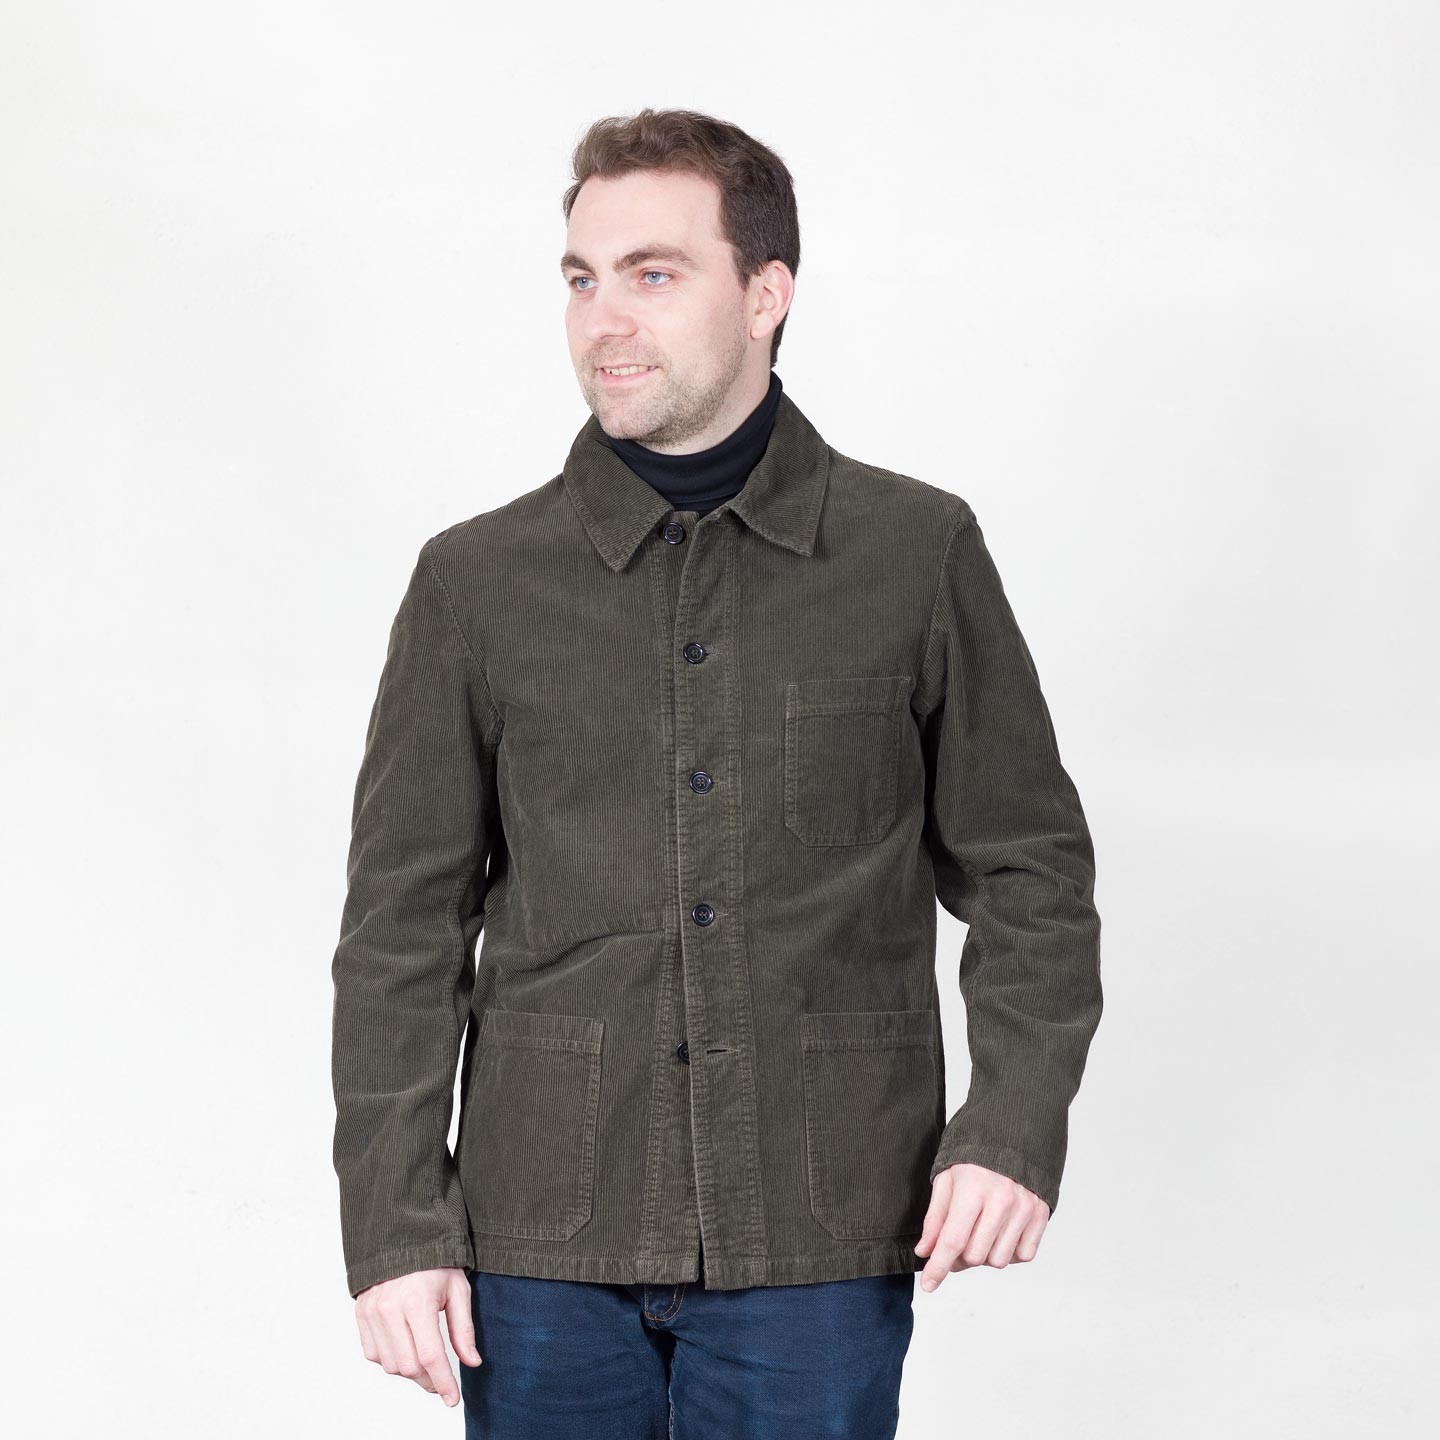 Soft corduroy French workwear men's jacket - VETRA 100% Made in France